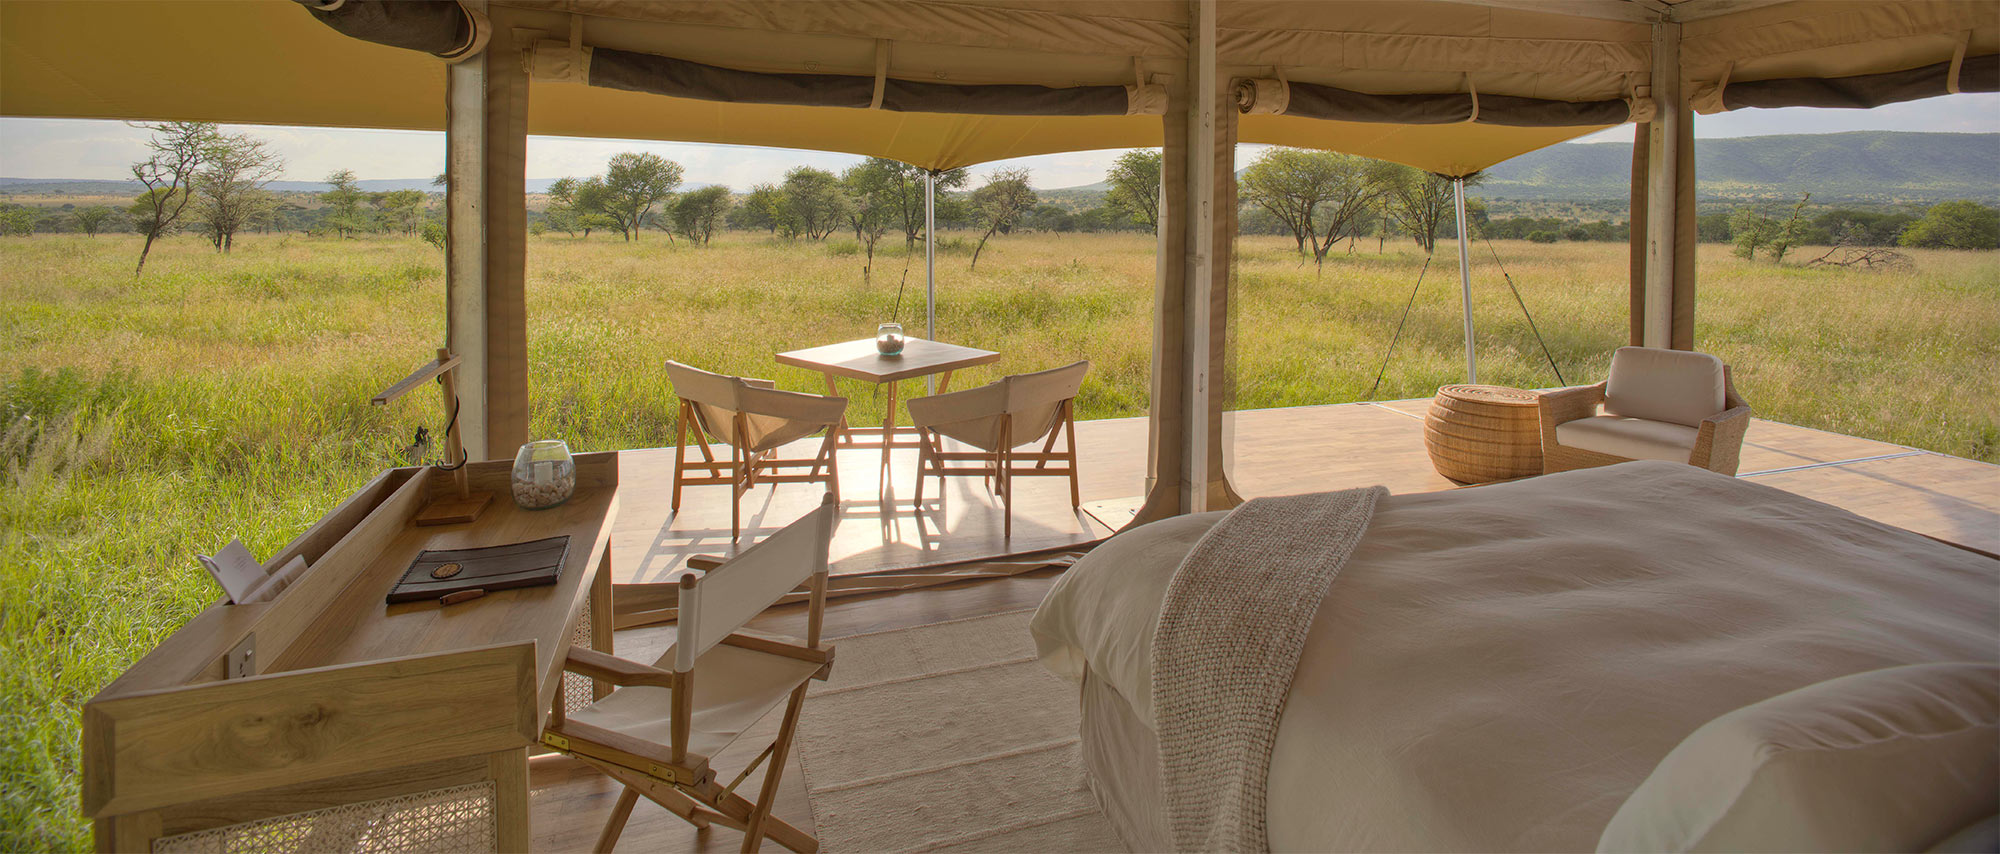 The tent bed overlooking the deck and out onto the Serengeti beyond